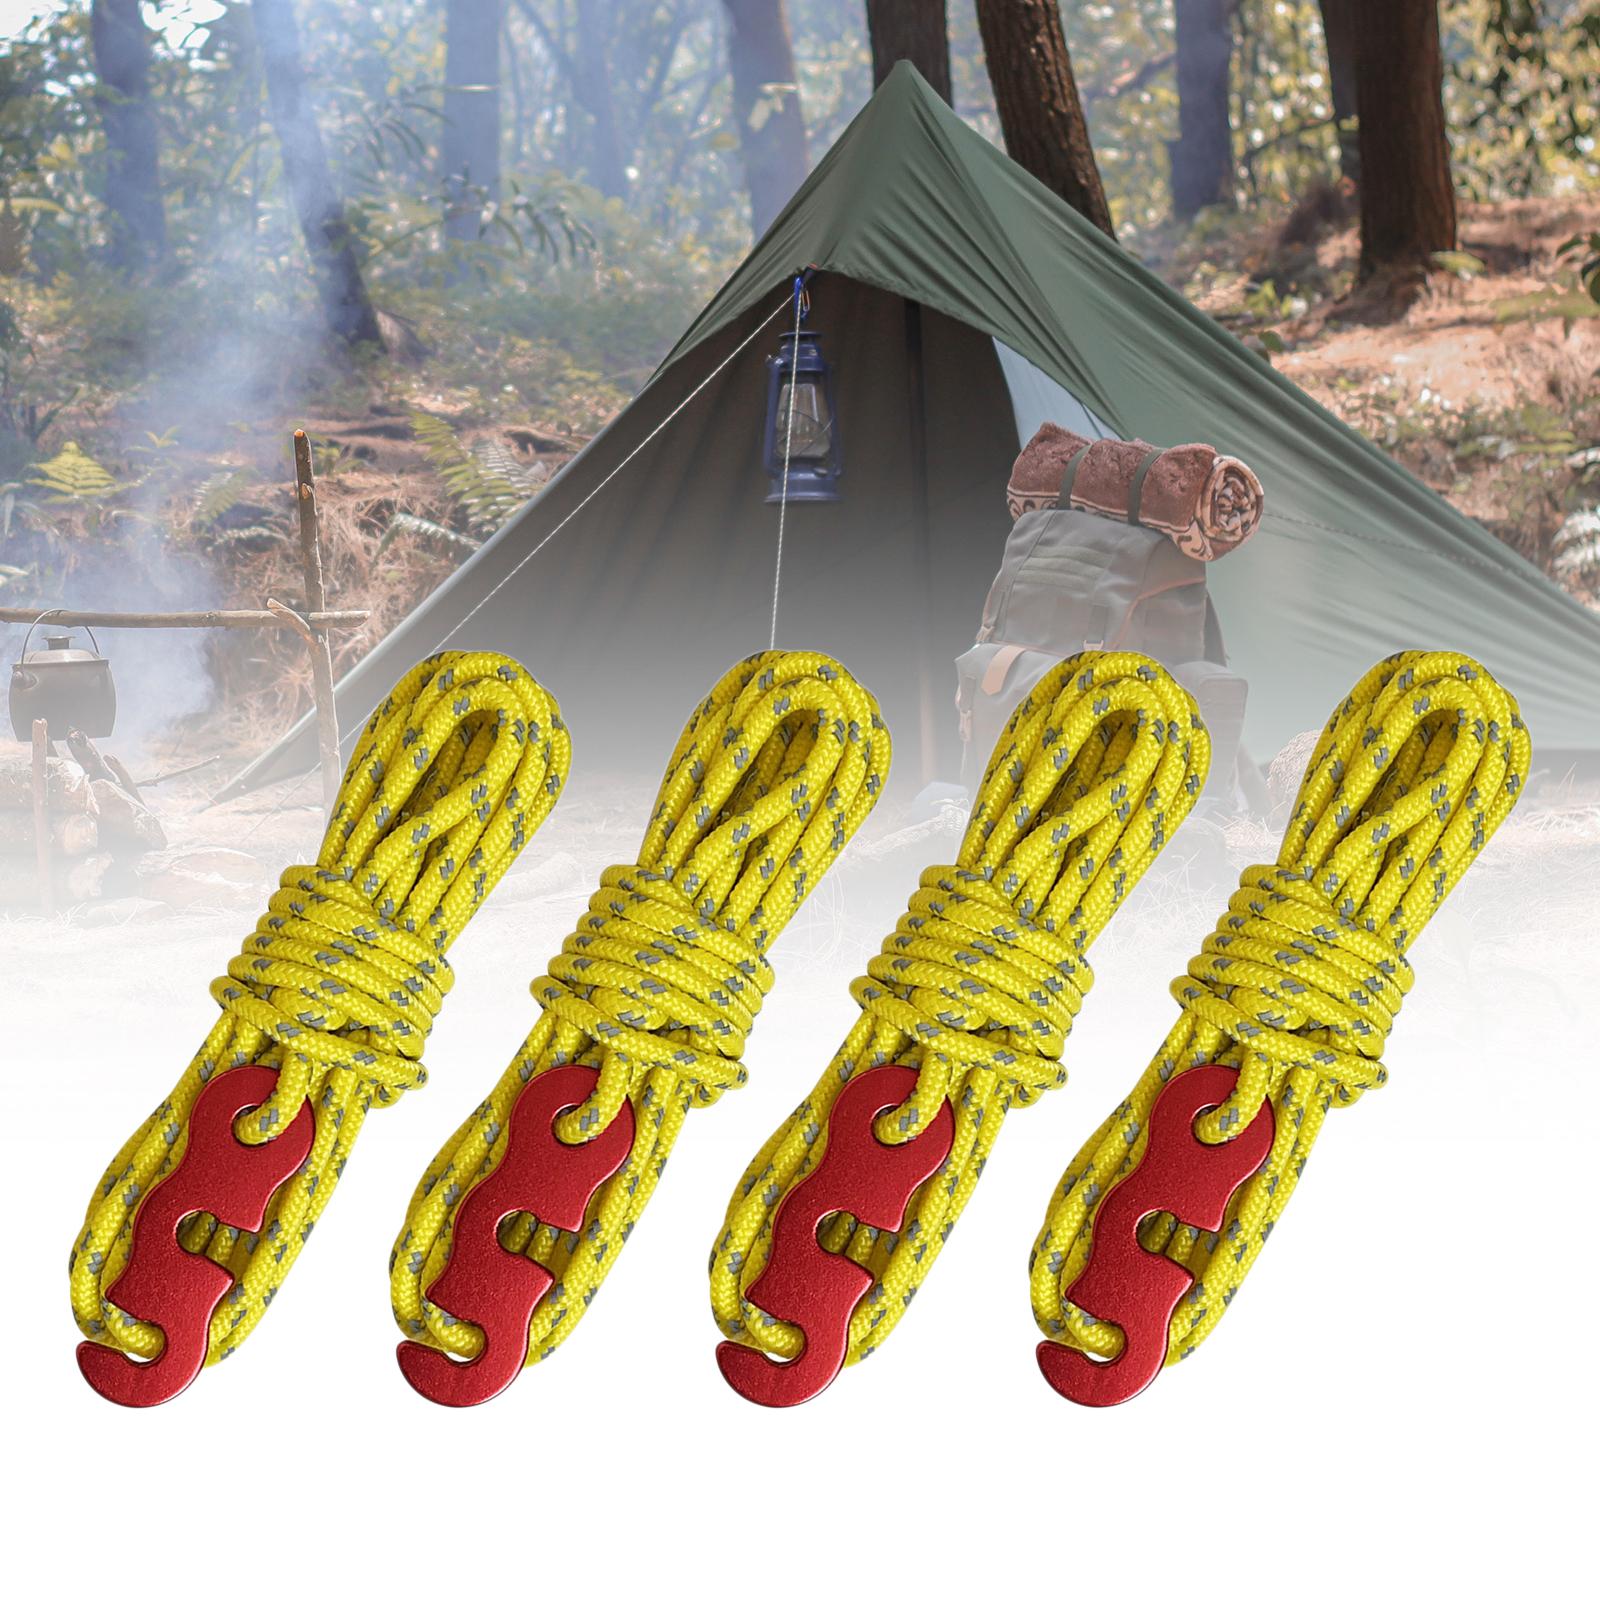 4x Camping Tent Cords Hiking Picnic Survival Gear Activity Outdoor Guy Lines Yellow